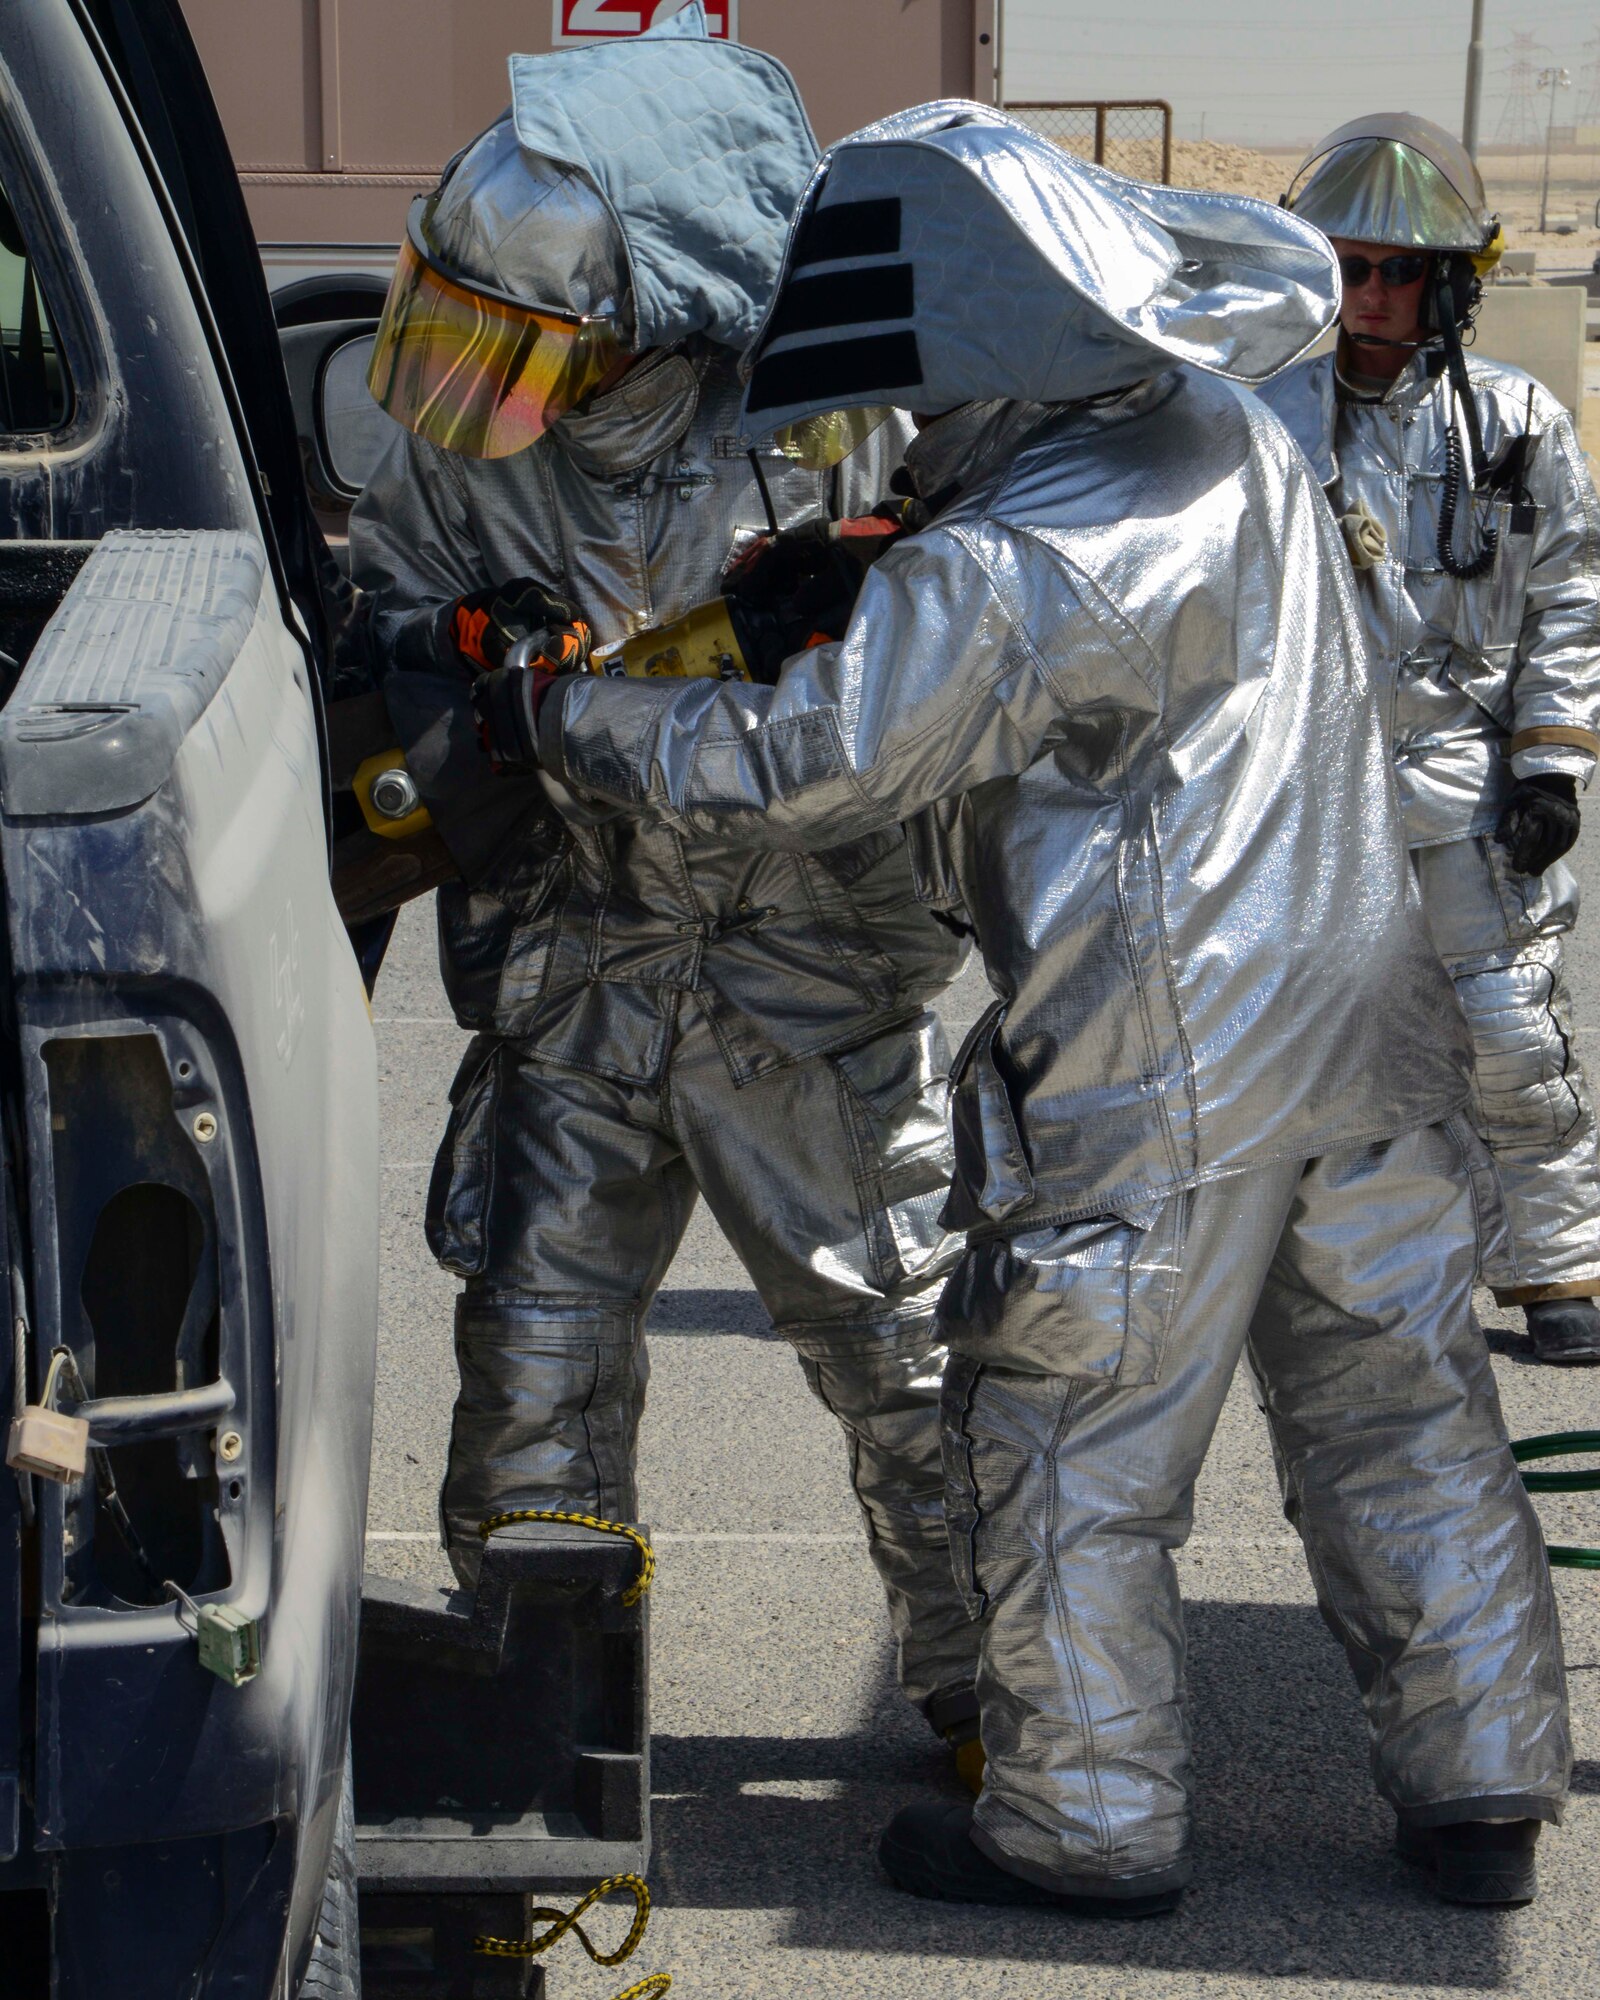 U.S. Air Force Airmen assigned to the 379th Expeditionary Civil Engineer Squadron prepare for a vehicle extrication demonstration at Al Udeid Air Base, Qatar, Oct. 8, 2014. Vehicle extrication is the result of a motor vehicle accident when conventional means of exit are impossible or inadvisable. (U.S. Air Force photo by Staff Sgt. Ciara Wymbs) 